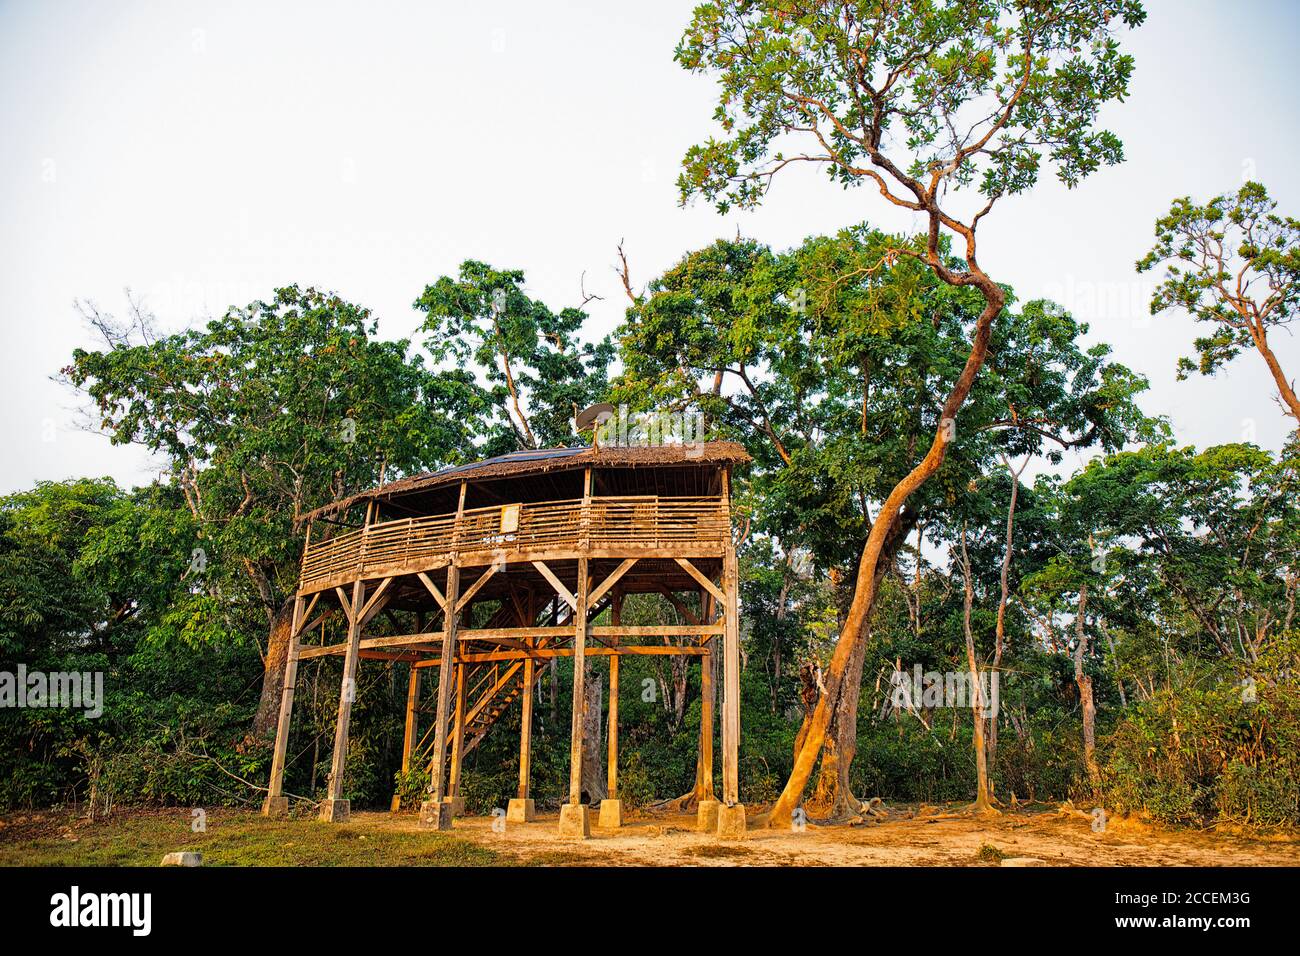 Observation tower to see elephants in Dzanga Bai. Here the African forest elephants (Loxodonta africana cyclotis) visit the forest clearings (BAI) to Stock Photo